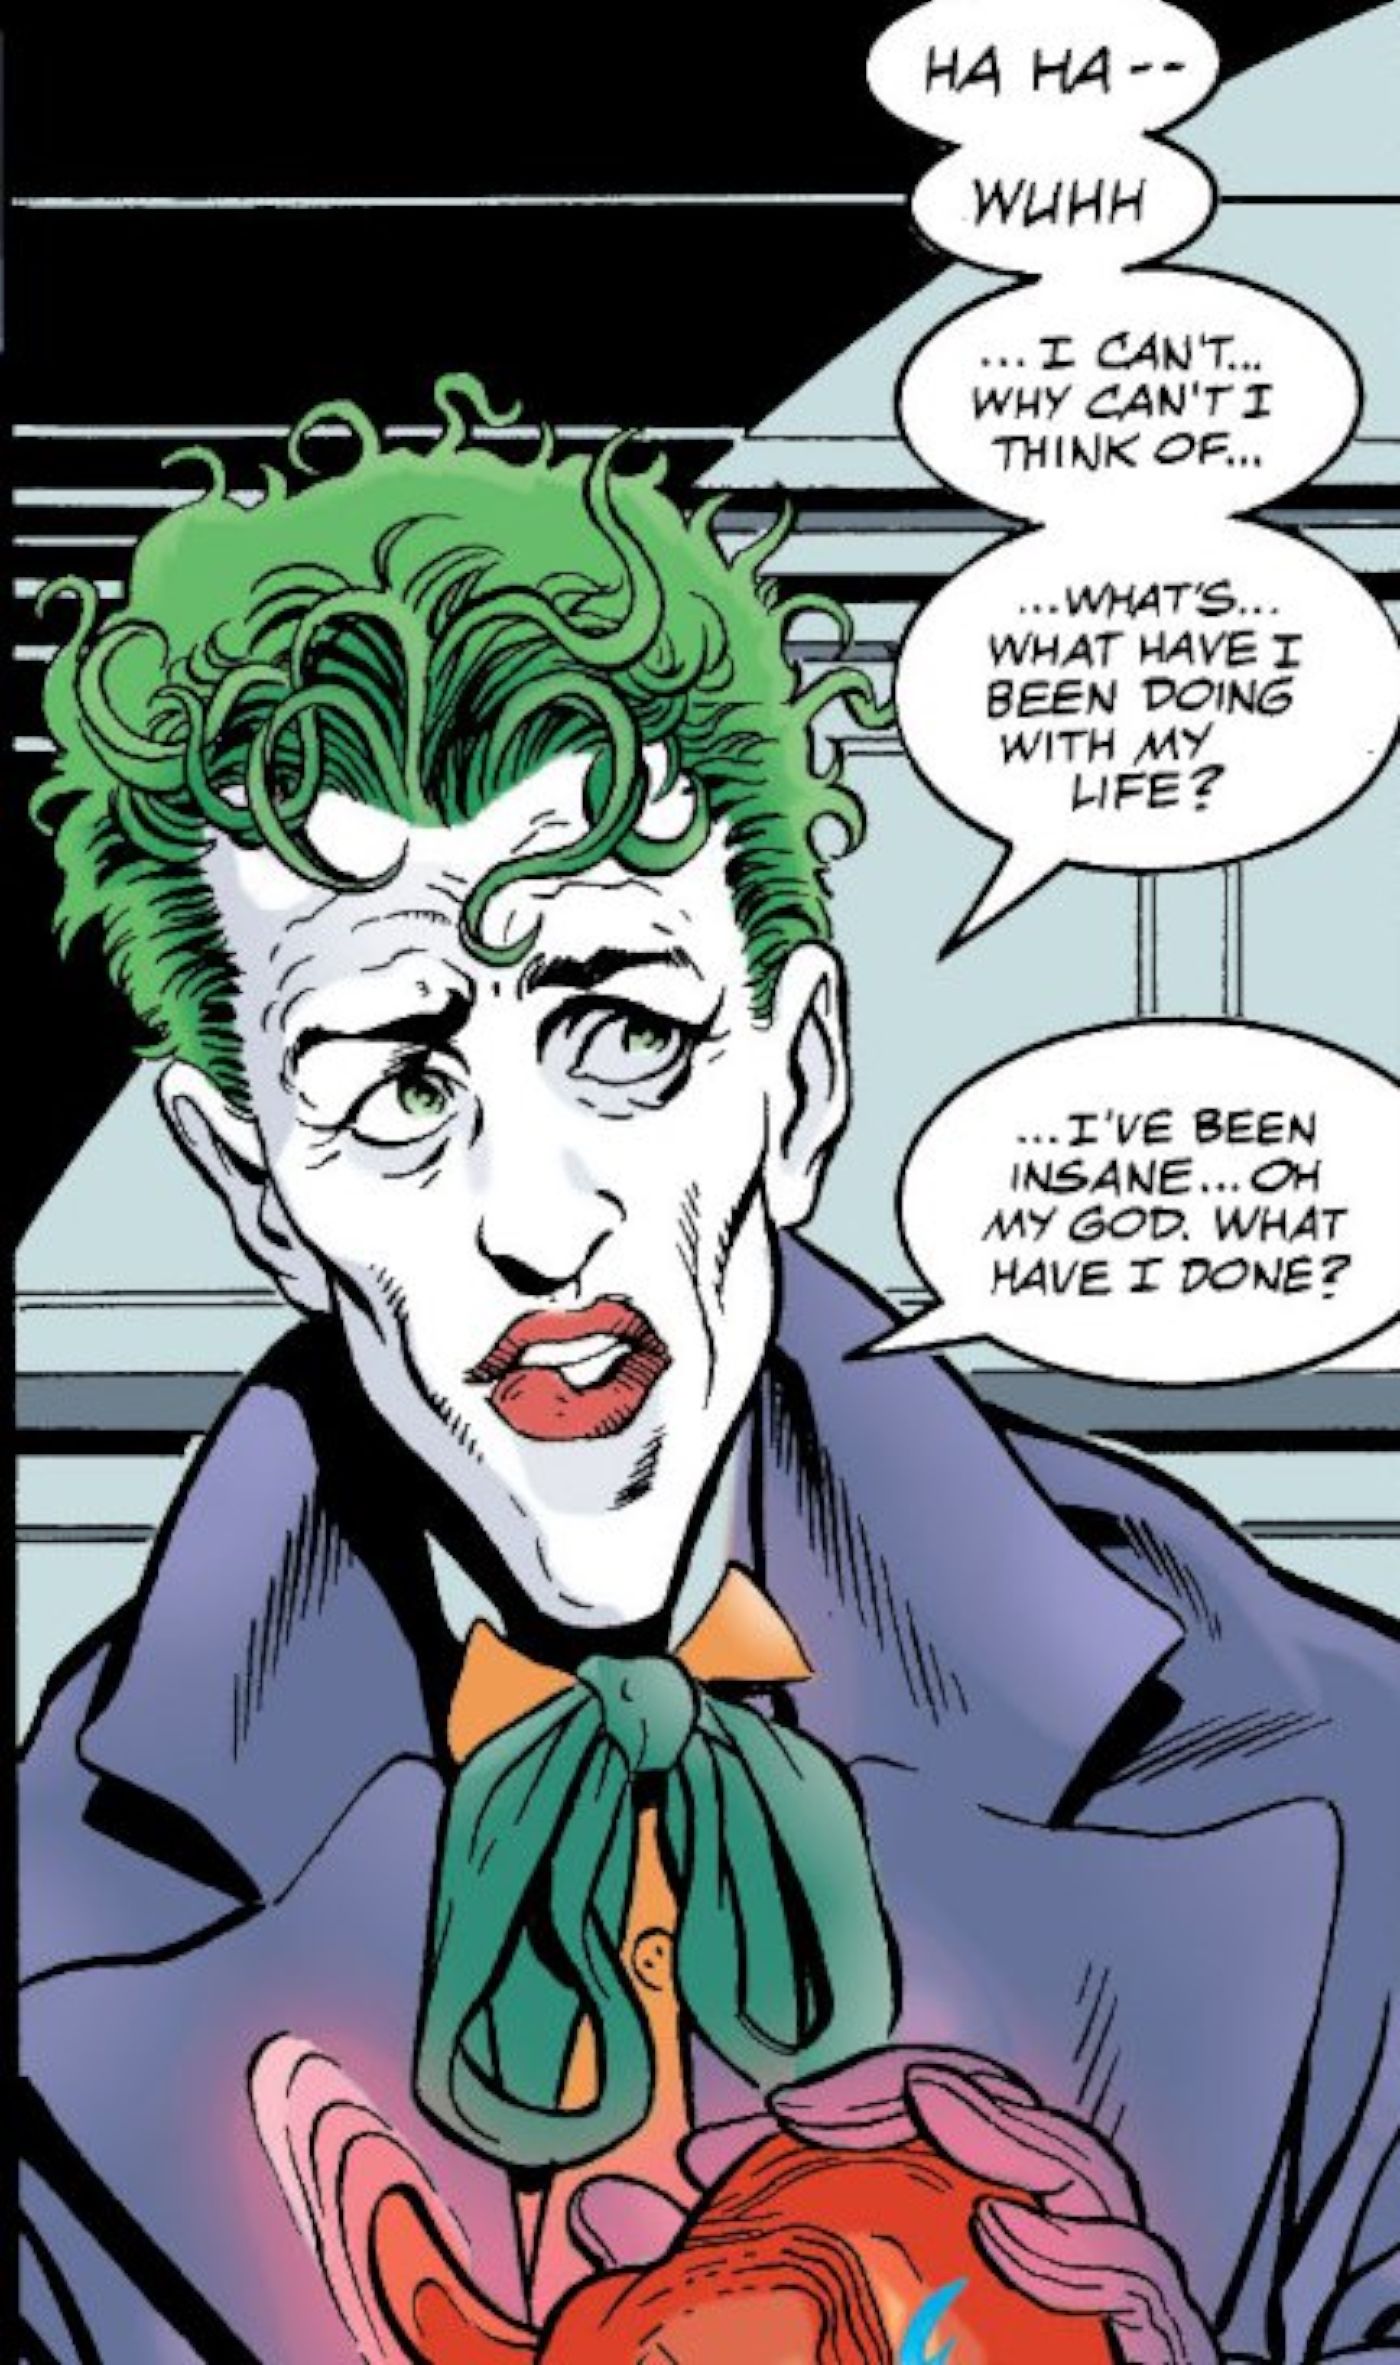 JLA #15, the Joker's sanity is restored and he asks 